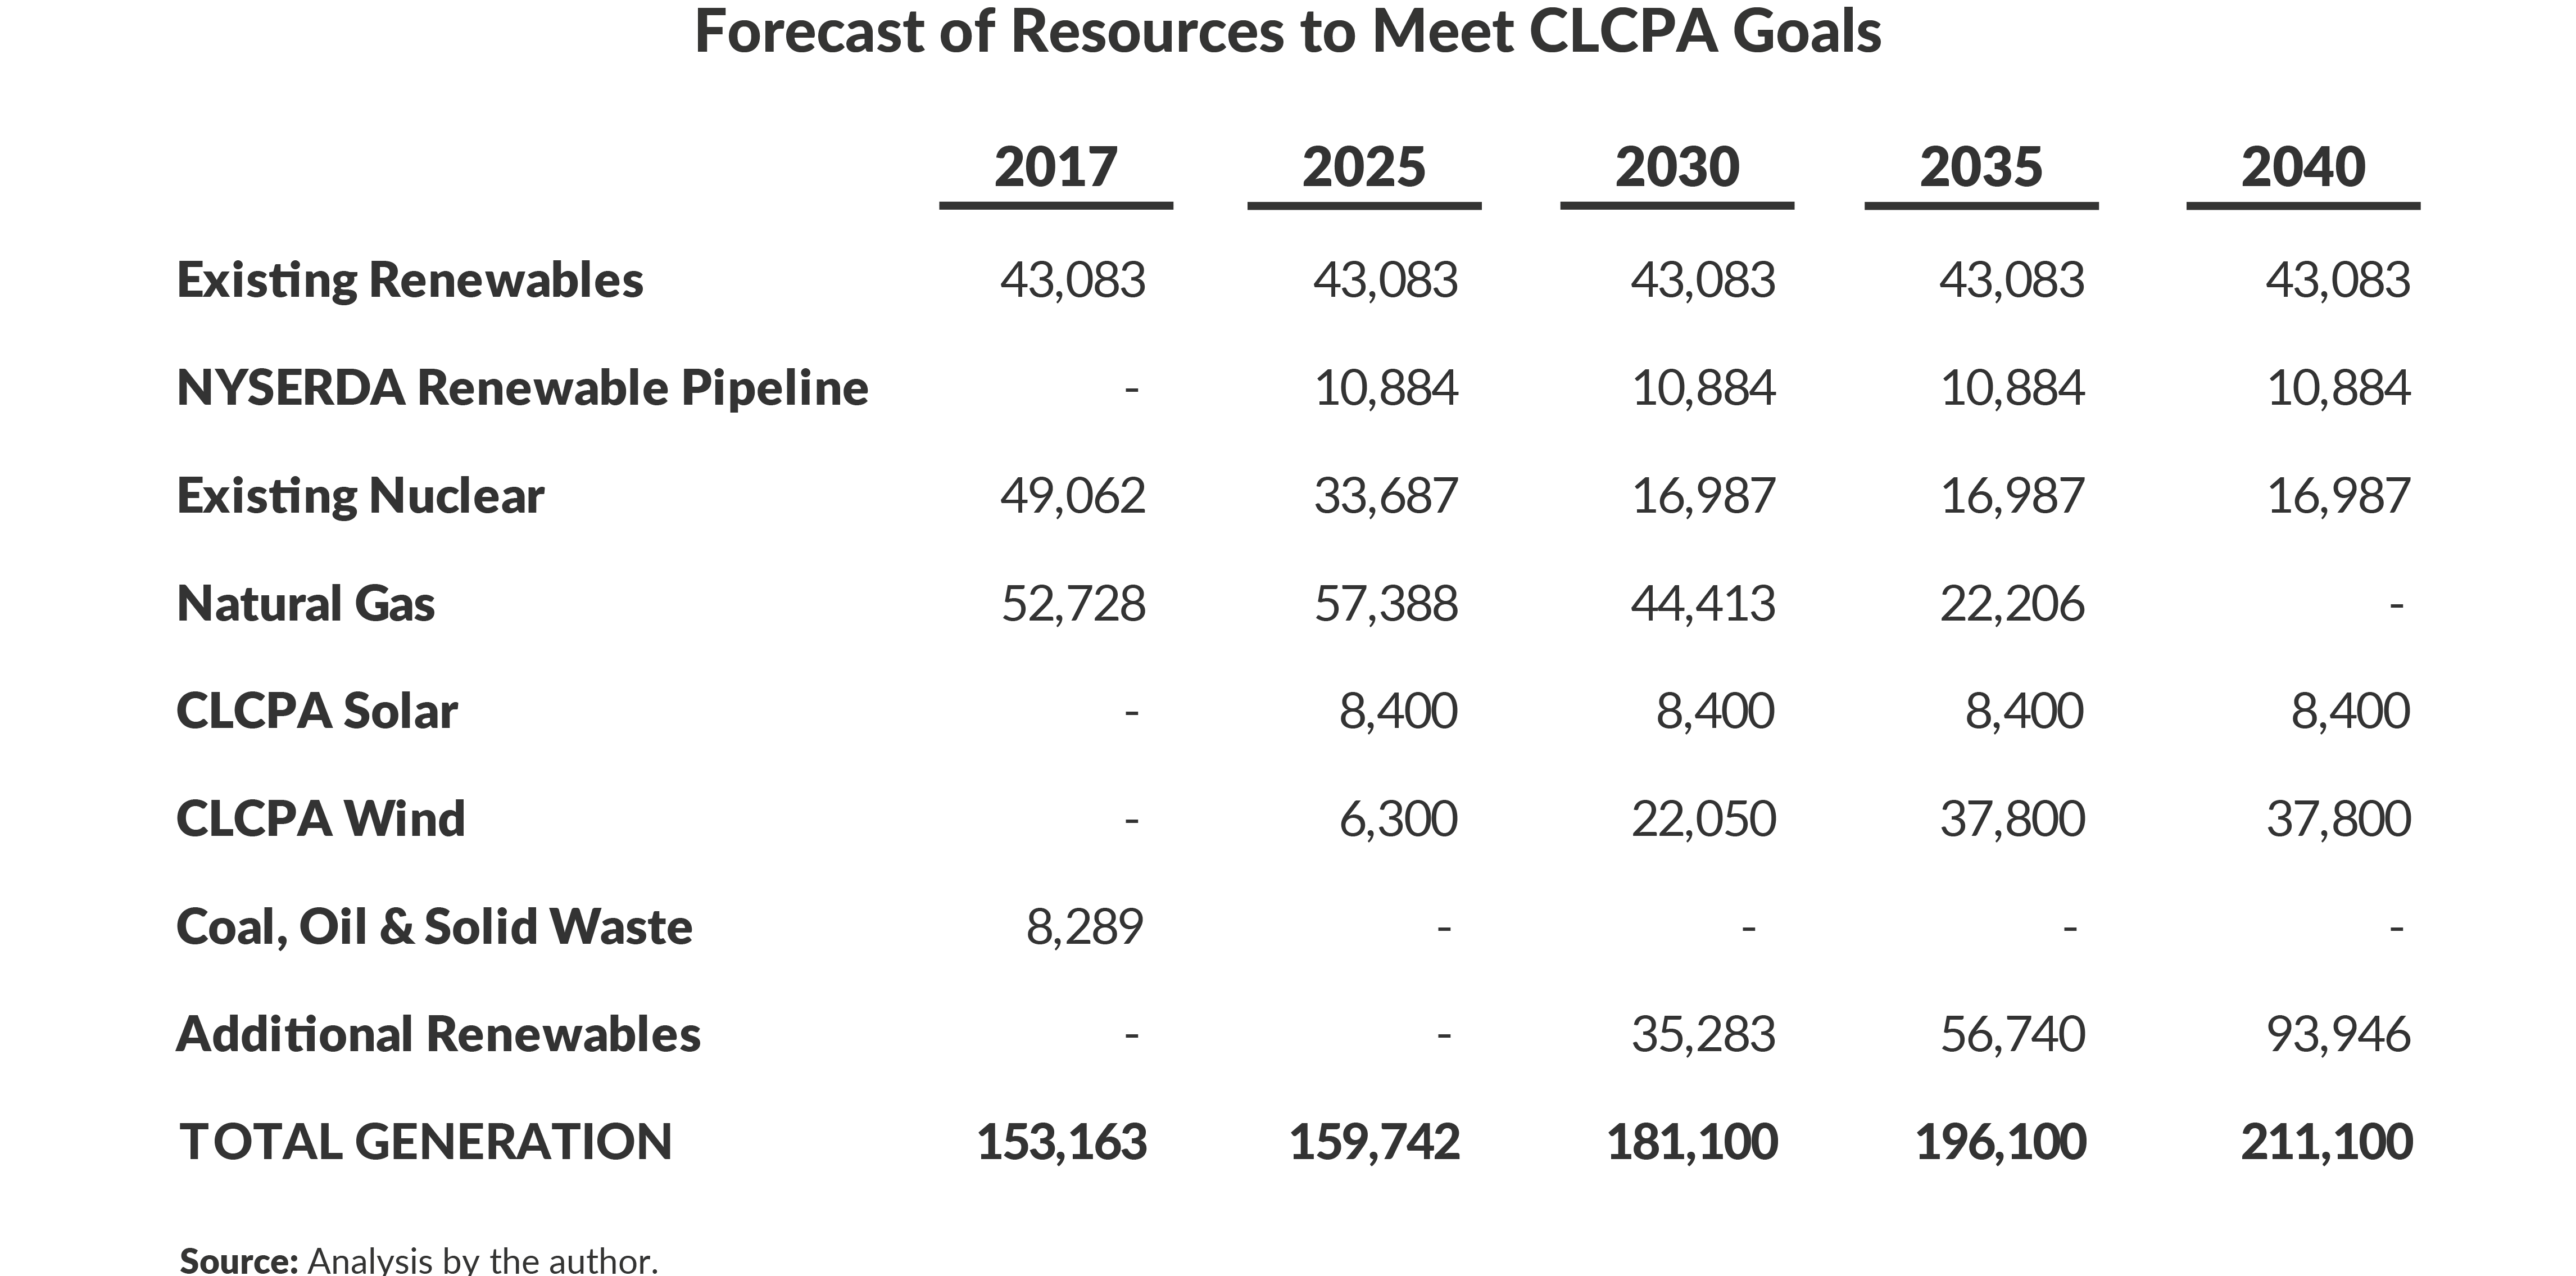 Forecast of Resources to Meet CLCPA Goals